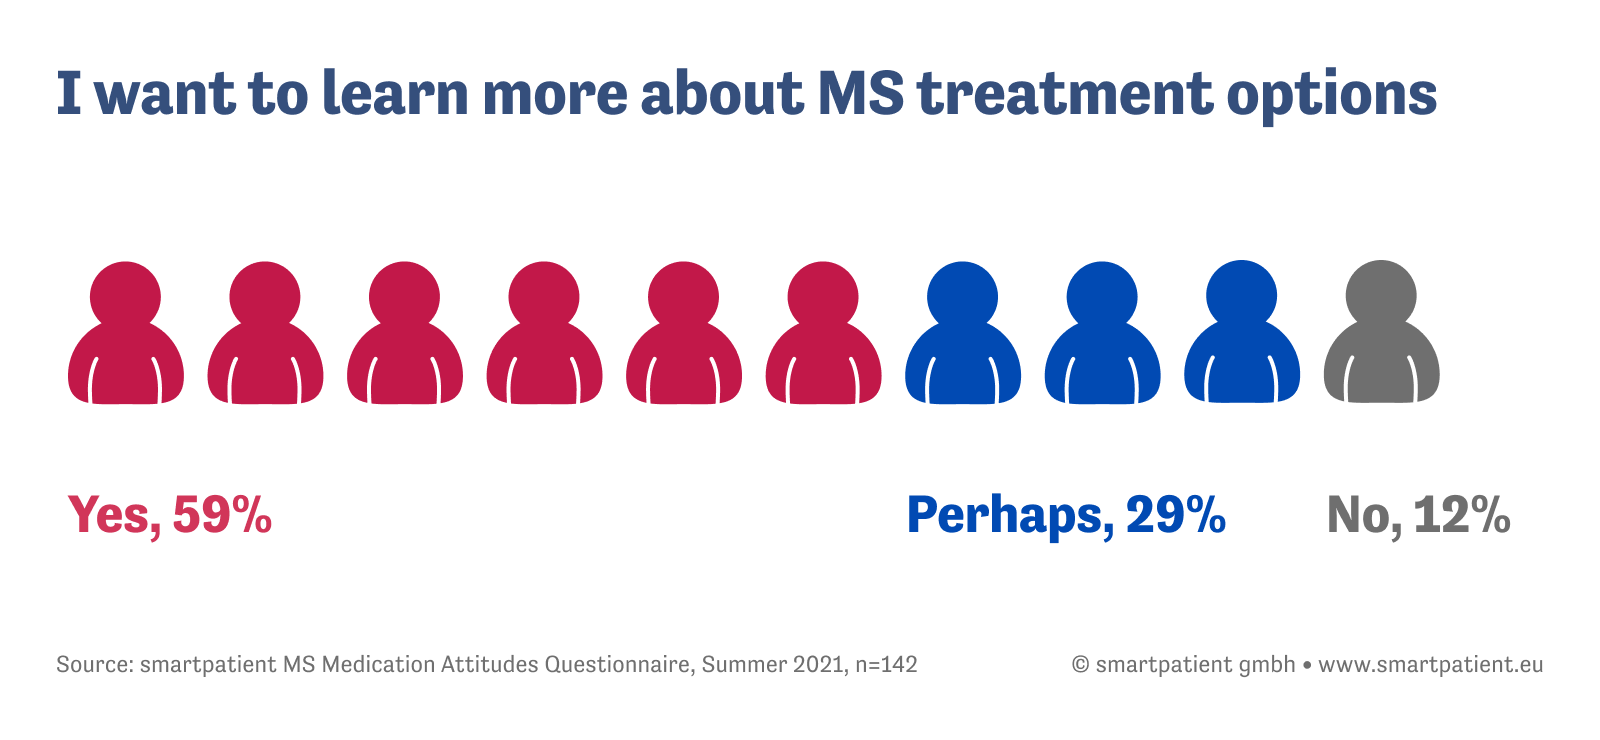 Image showing results from MS treatment survey question: "Do you want to learn more about alternative treatment options?" Yes: 59% Maybe: 29% No: 12%